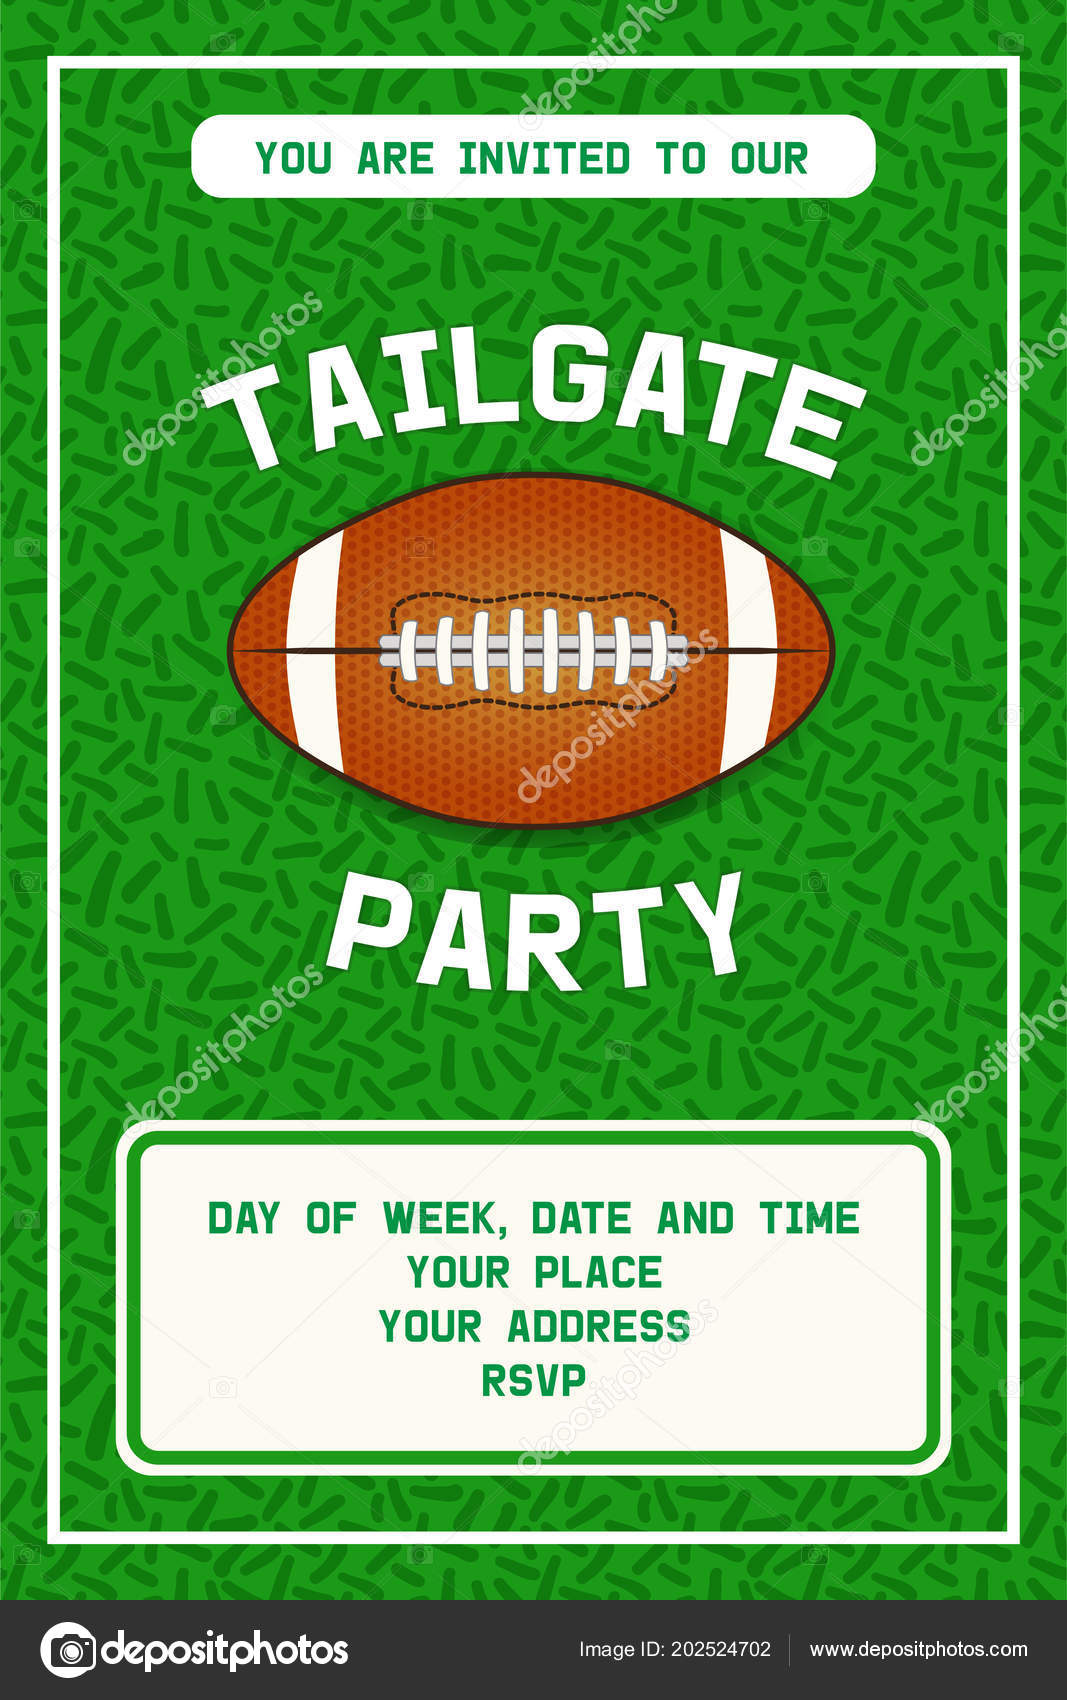 American Football Tailgate Party Flyer Design Stock Vector Image By C Ishkrabal 202524702